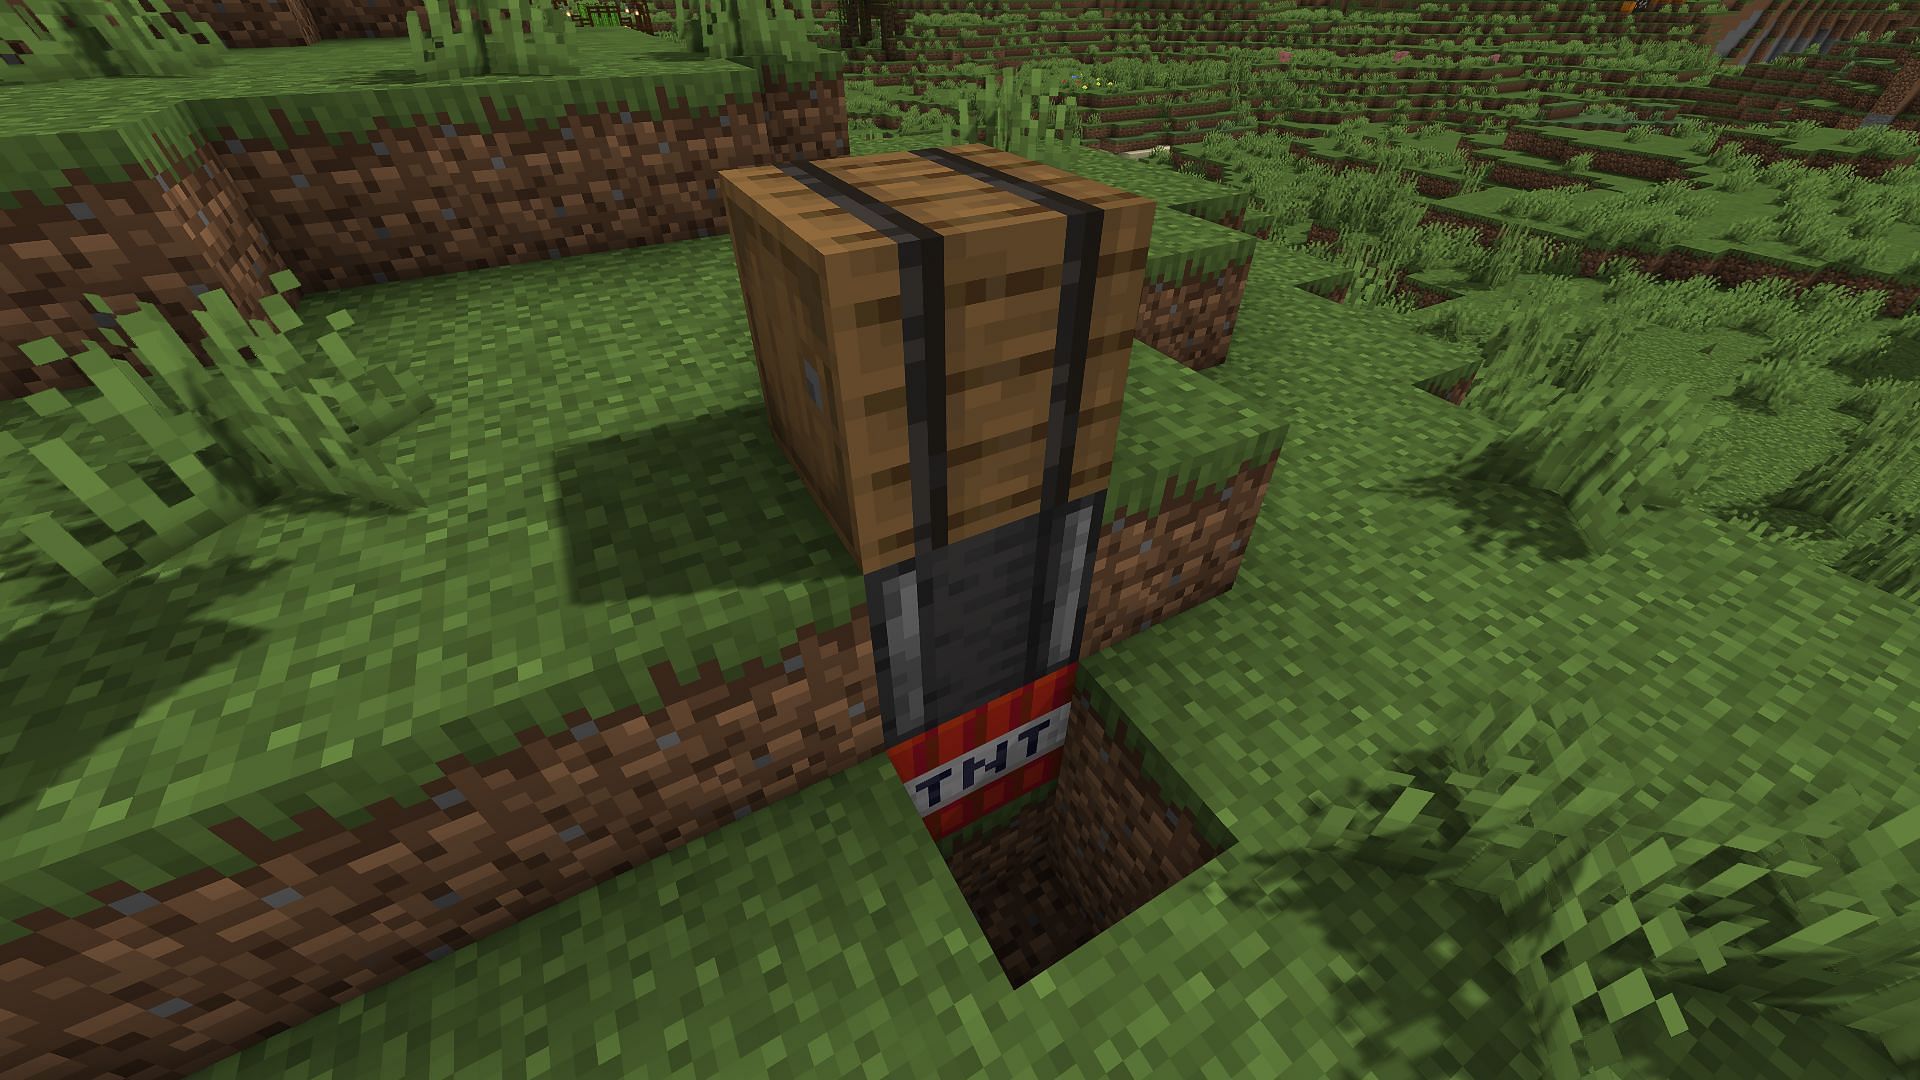 An example of a trapped barrel setup (Image via Minecraft)